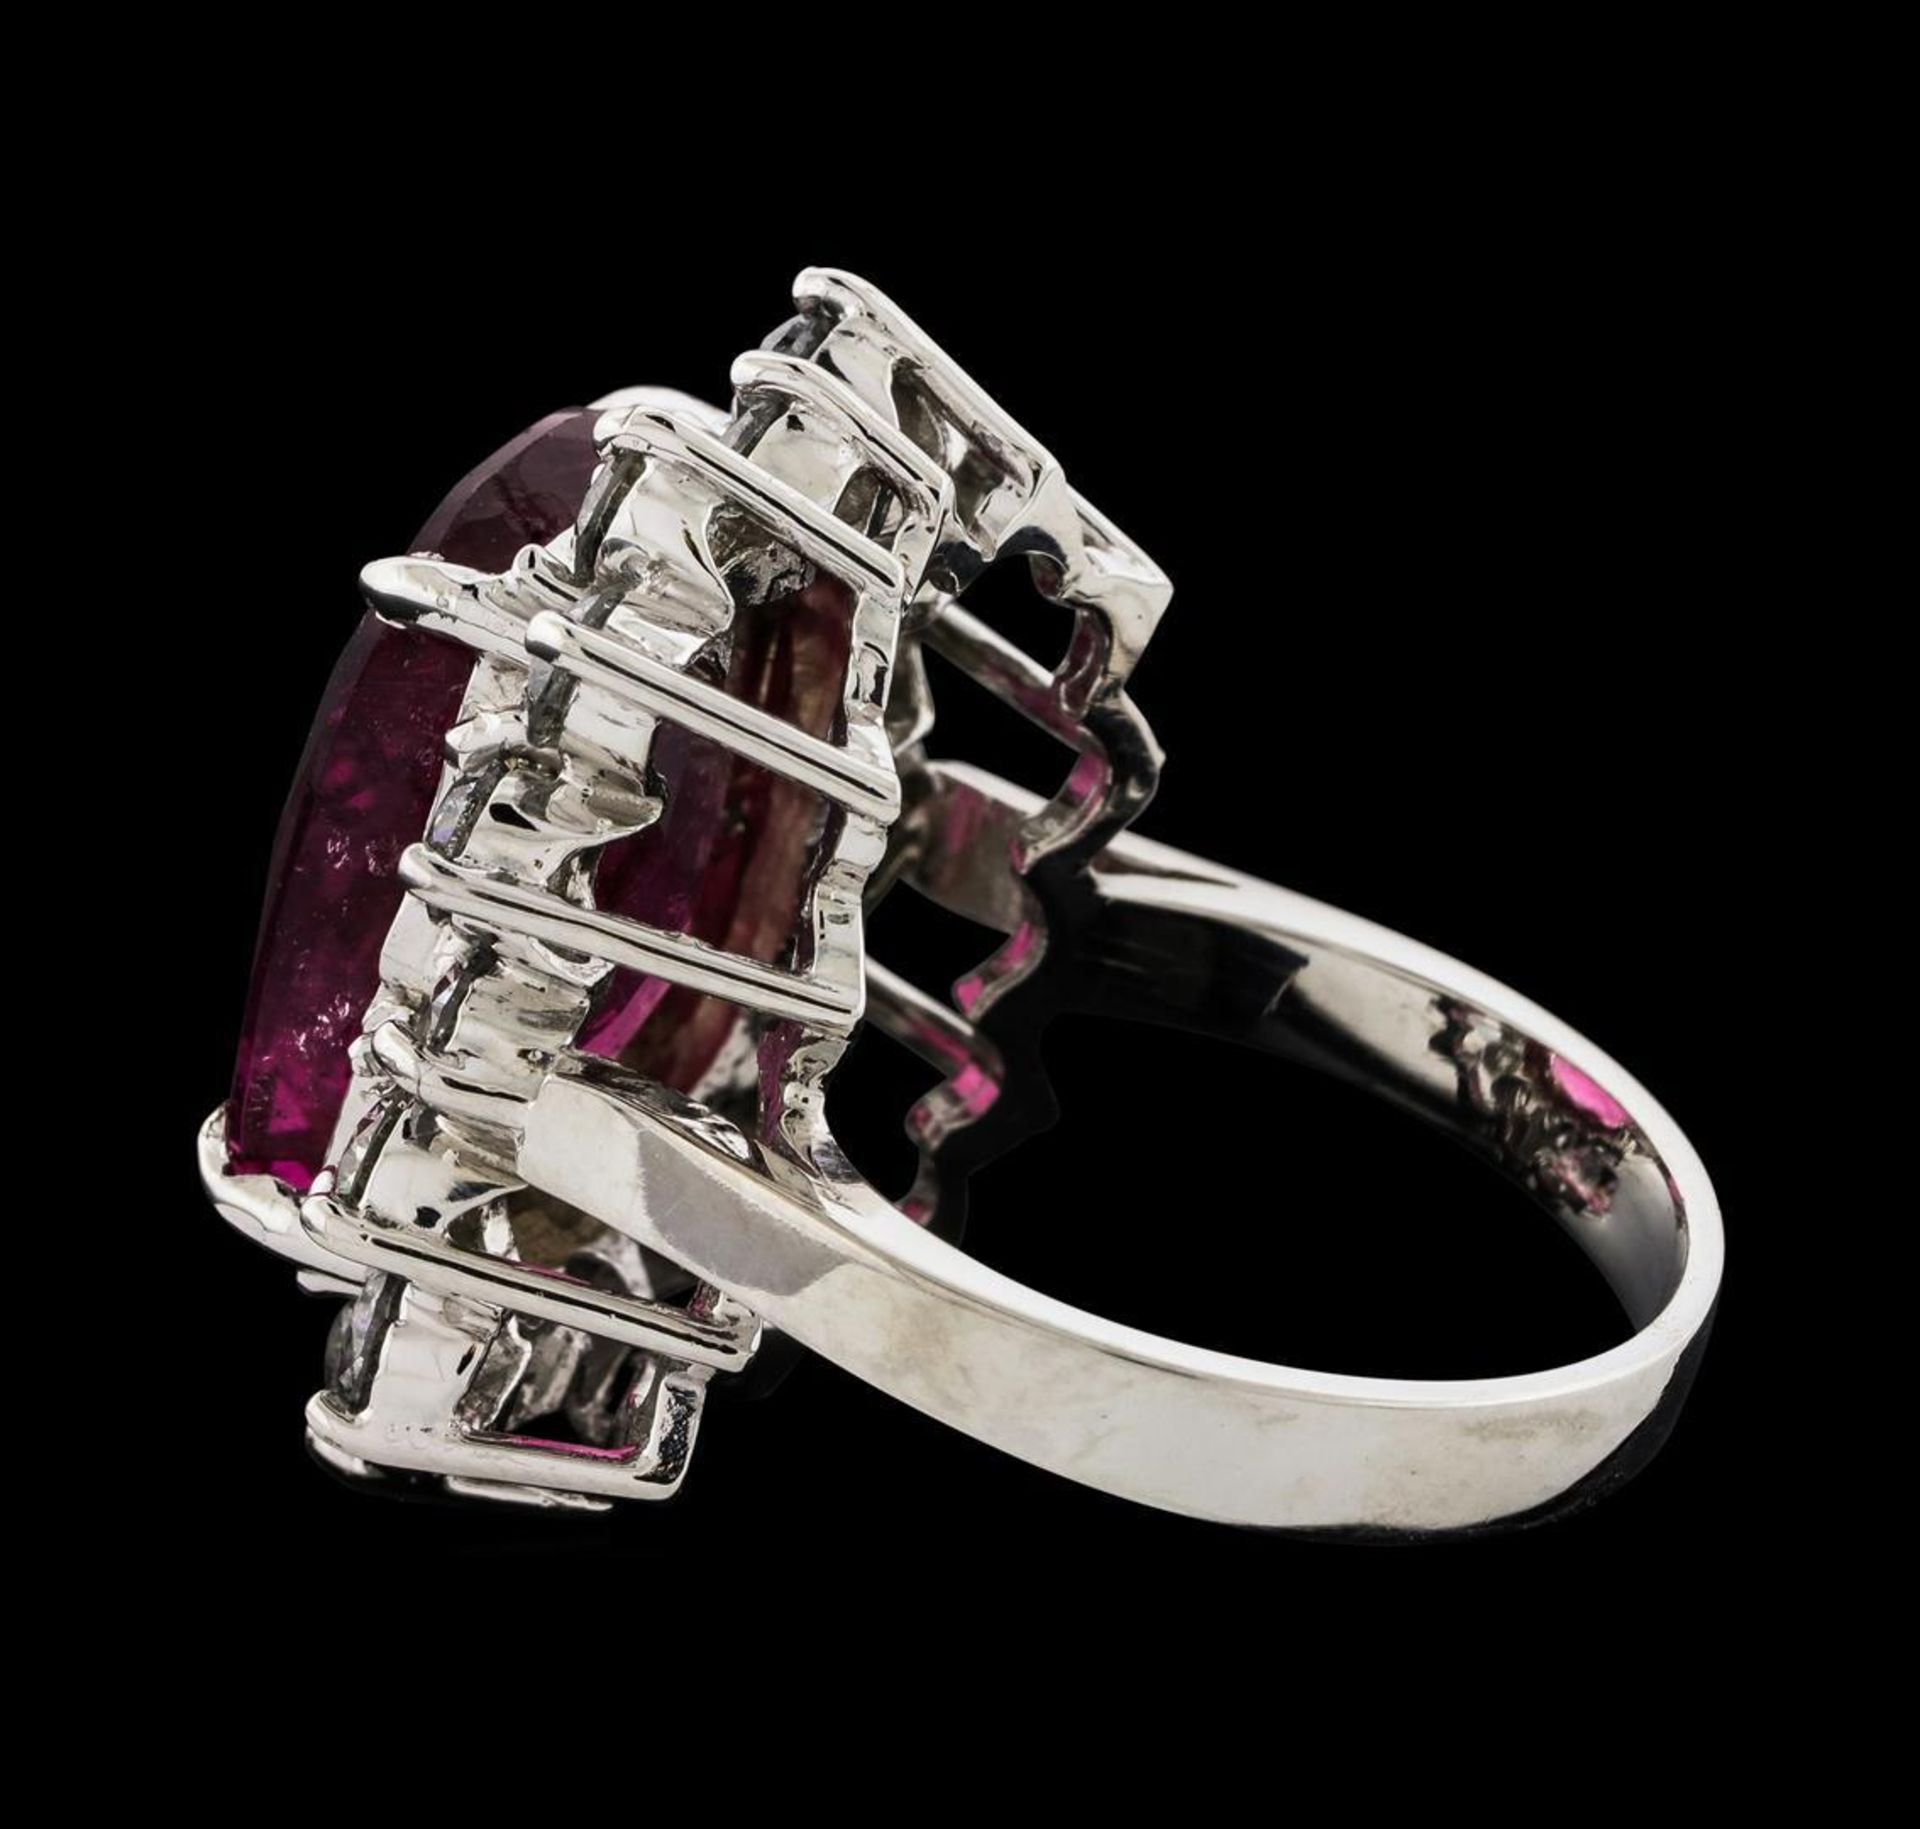 11.12 ctw Tourmaline and Diamond Ring - 14KT White Gold - Image 3 of 5